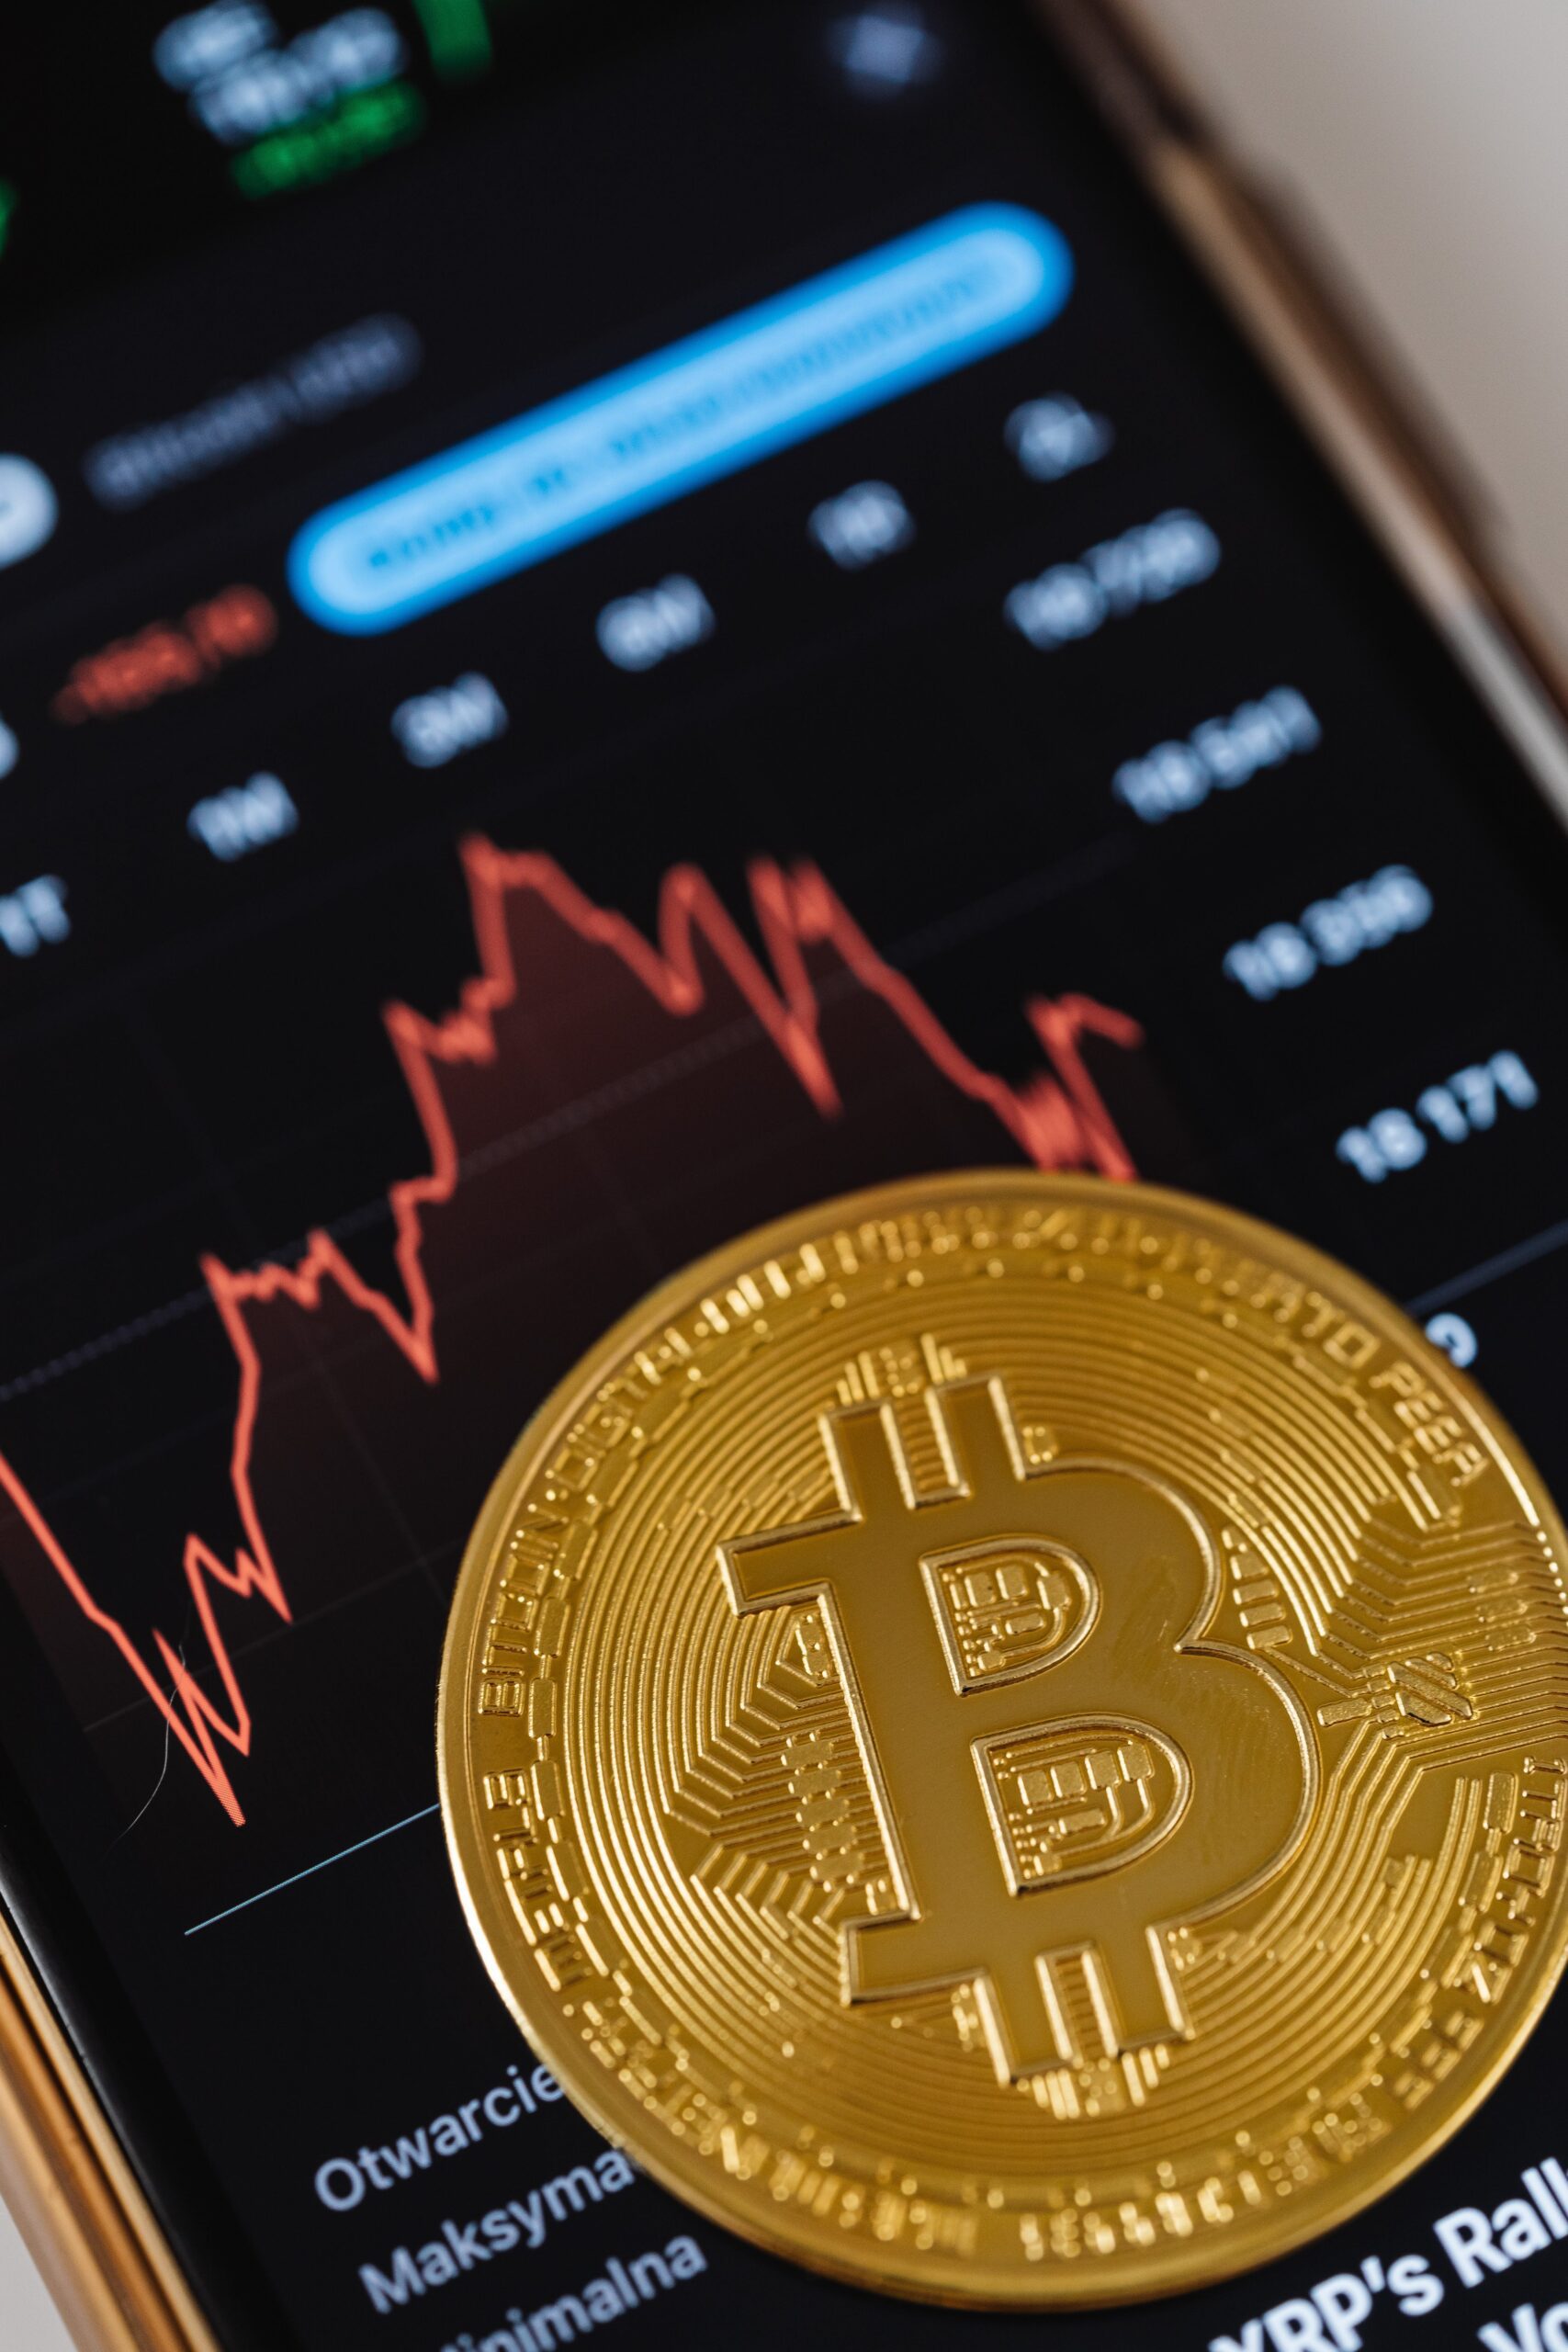 Crypto News provides the latest updates and information on cryptocurrencies